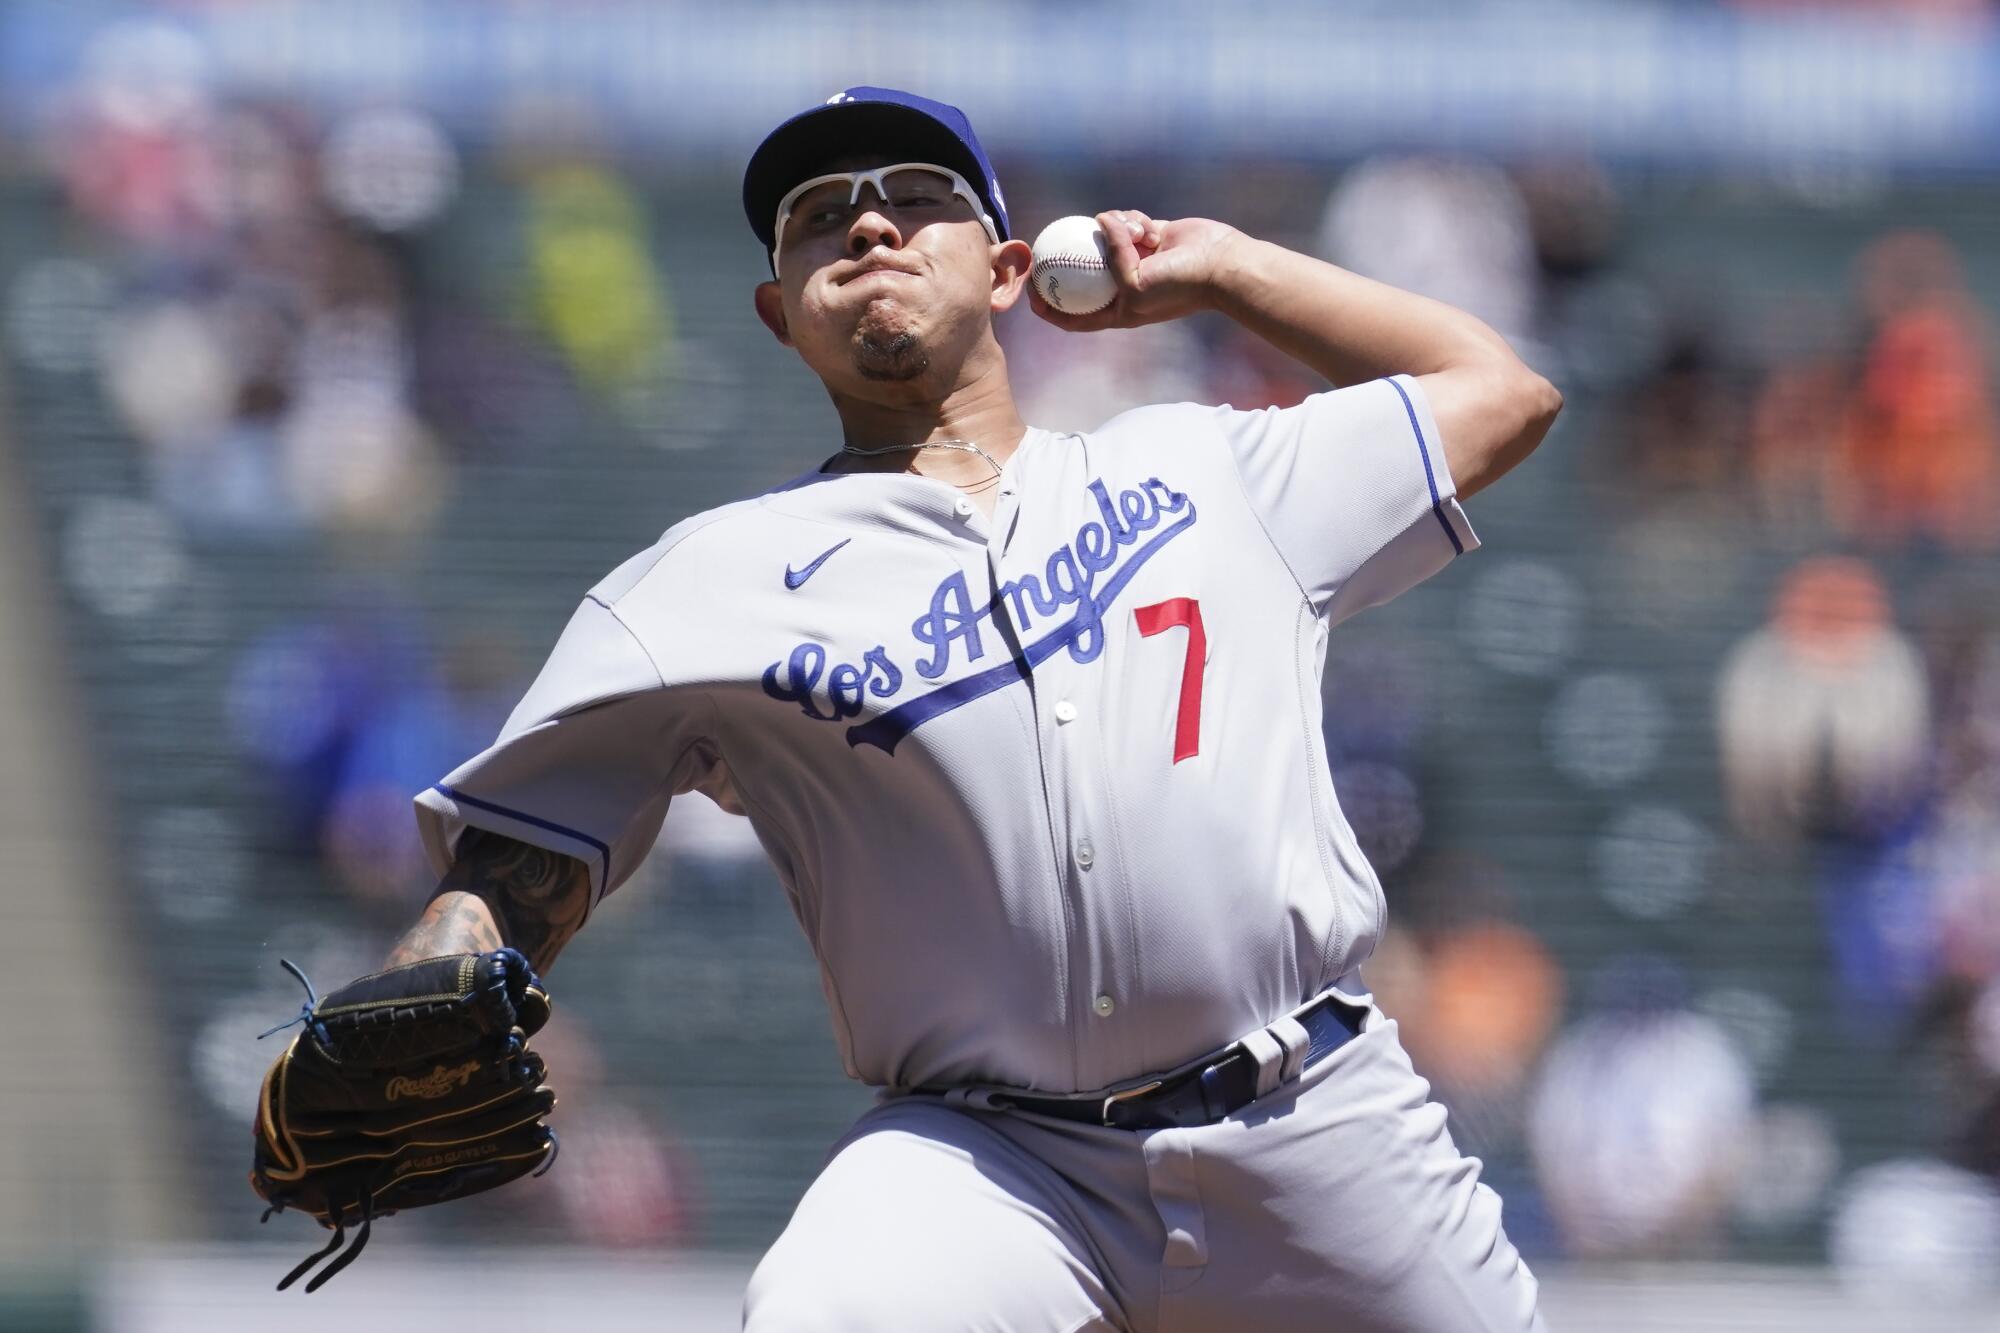 Los Angeles Dodgers' Julio Urias pitches against the San Francisco Giants during the first inning.